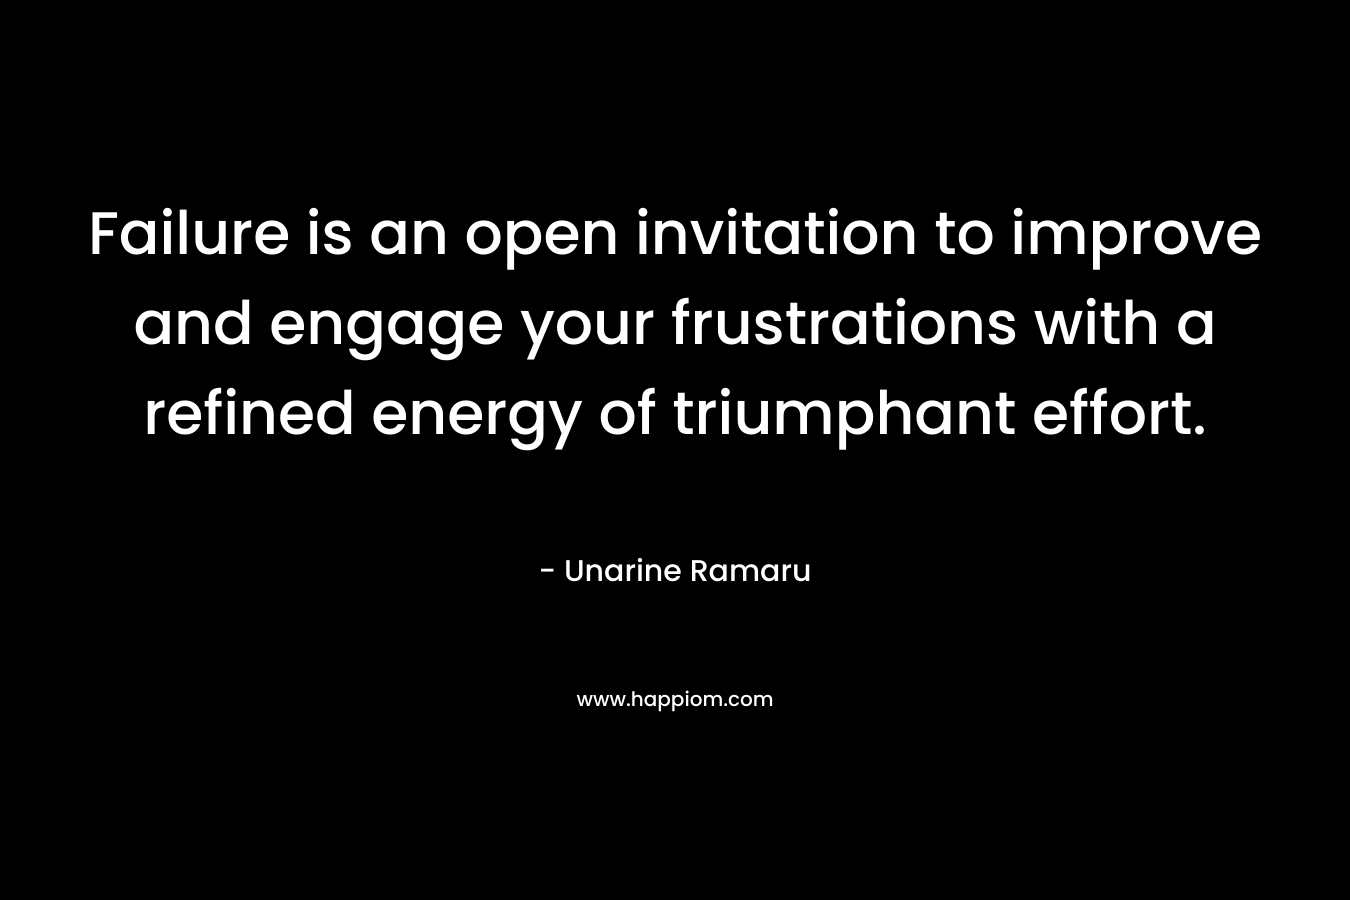 Failure is an open invitation to improve and engage your frustrations with a refined energy of triumphant effort. – Unarine Ramaru